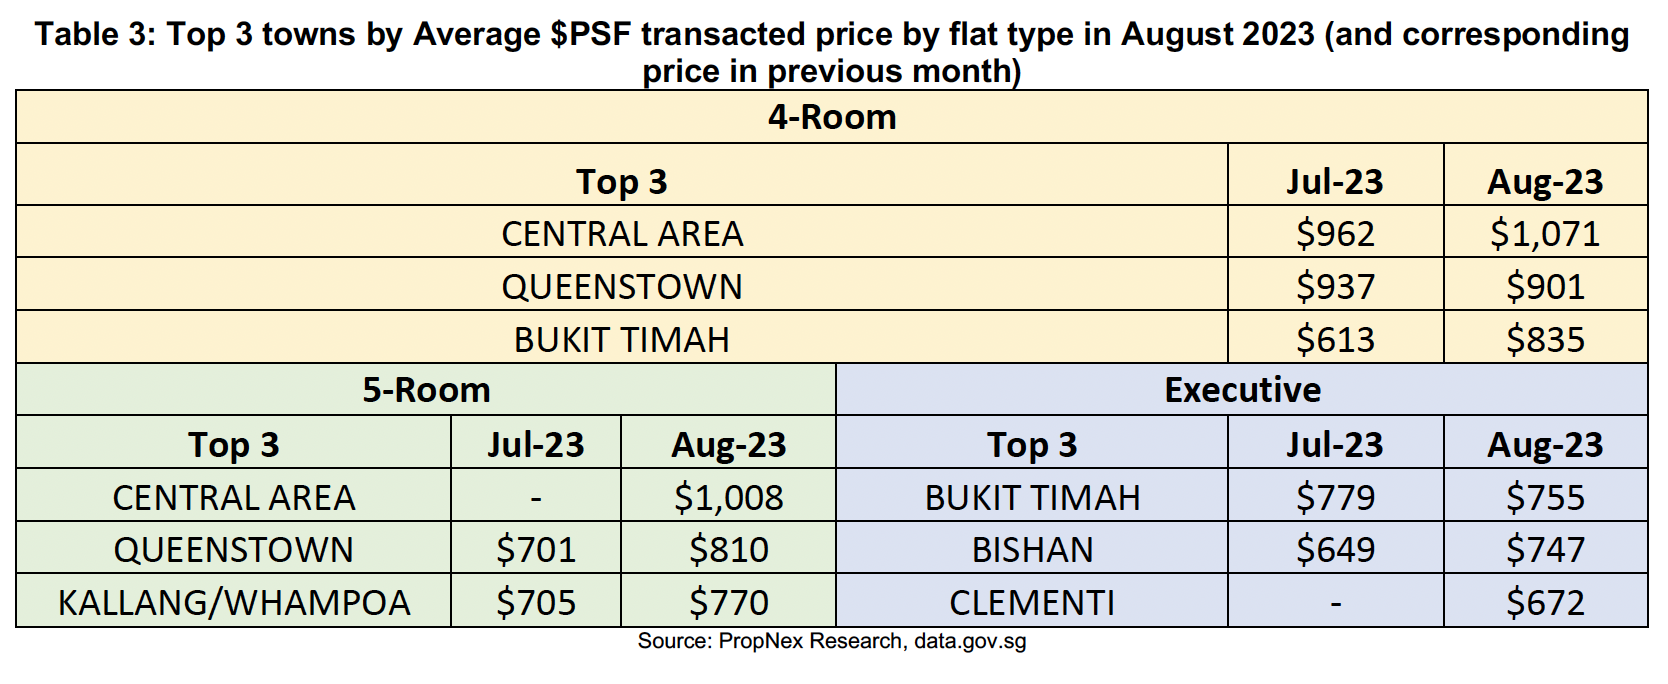 Top 3 towns by average PSF transacted price by flat type in August 2023